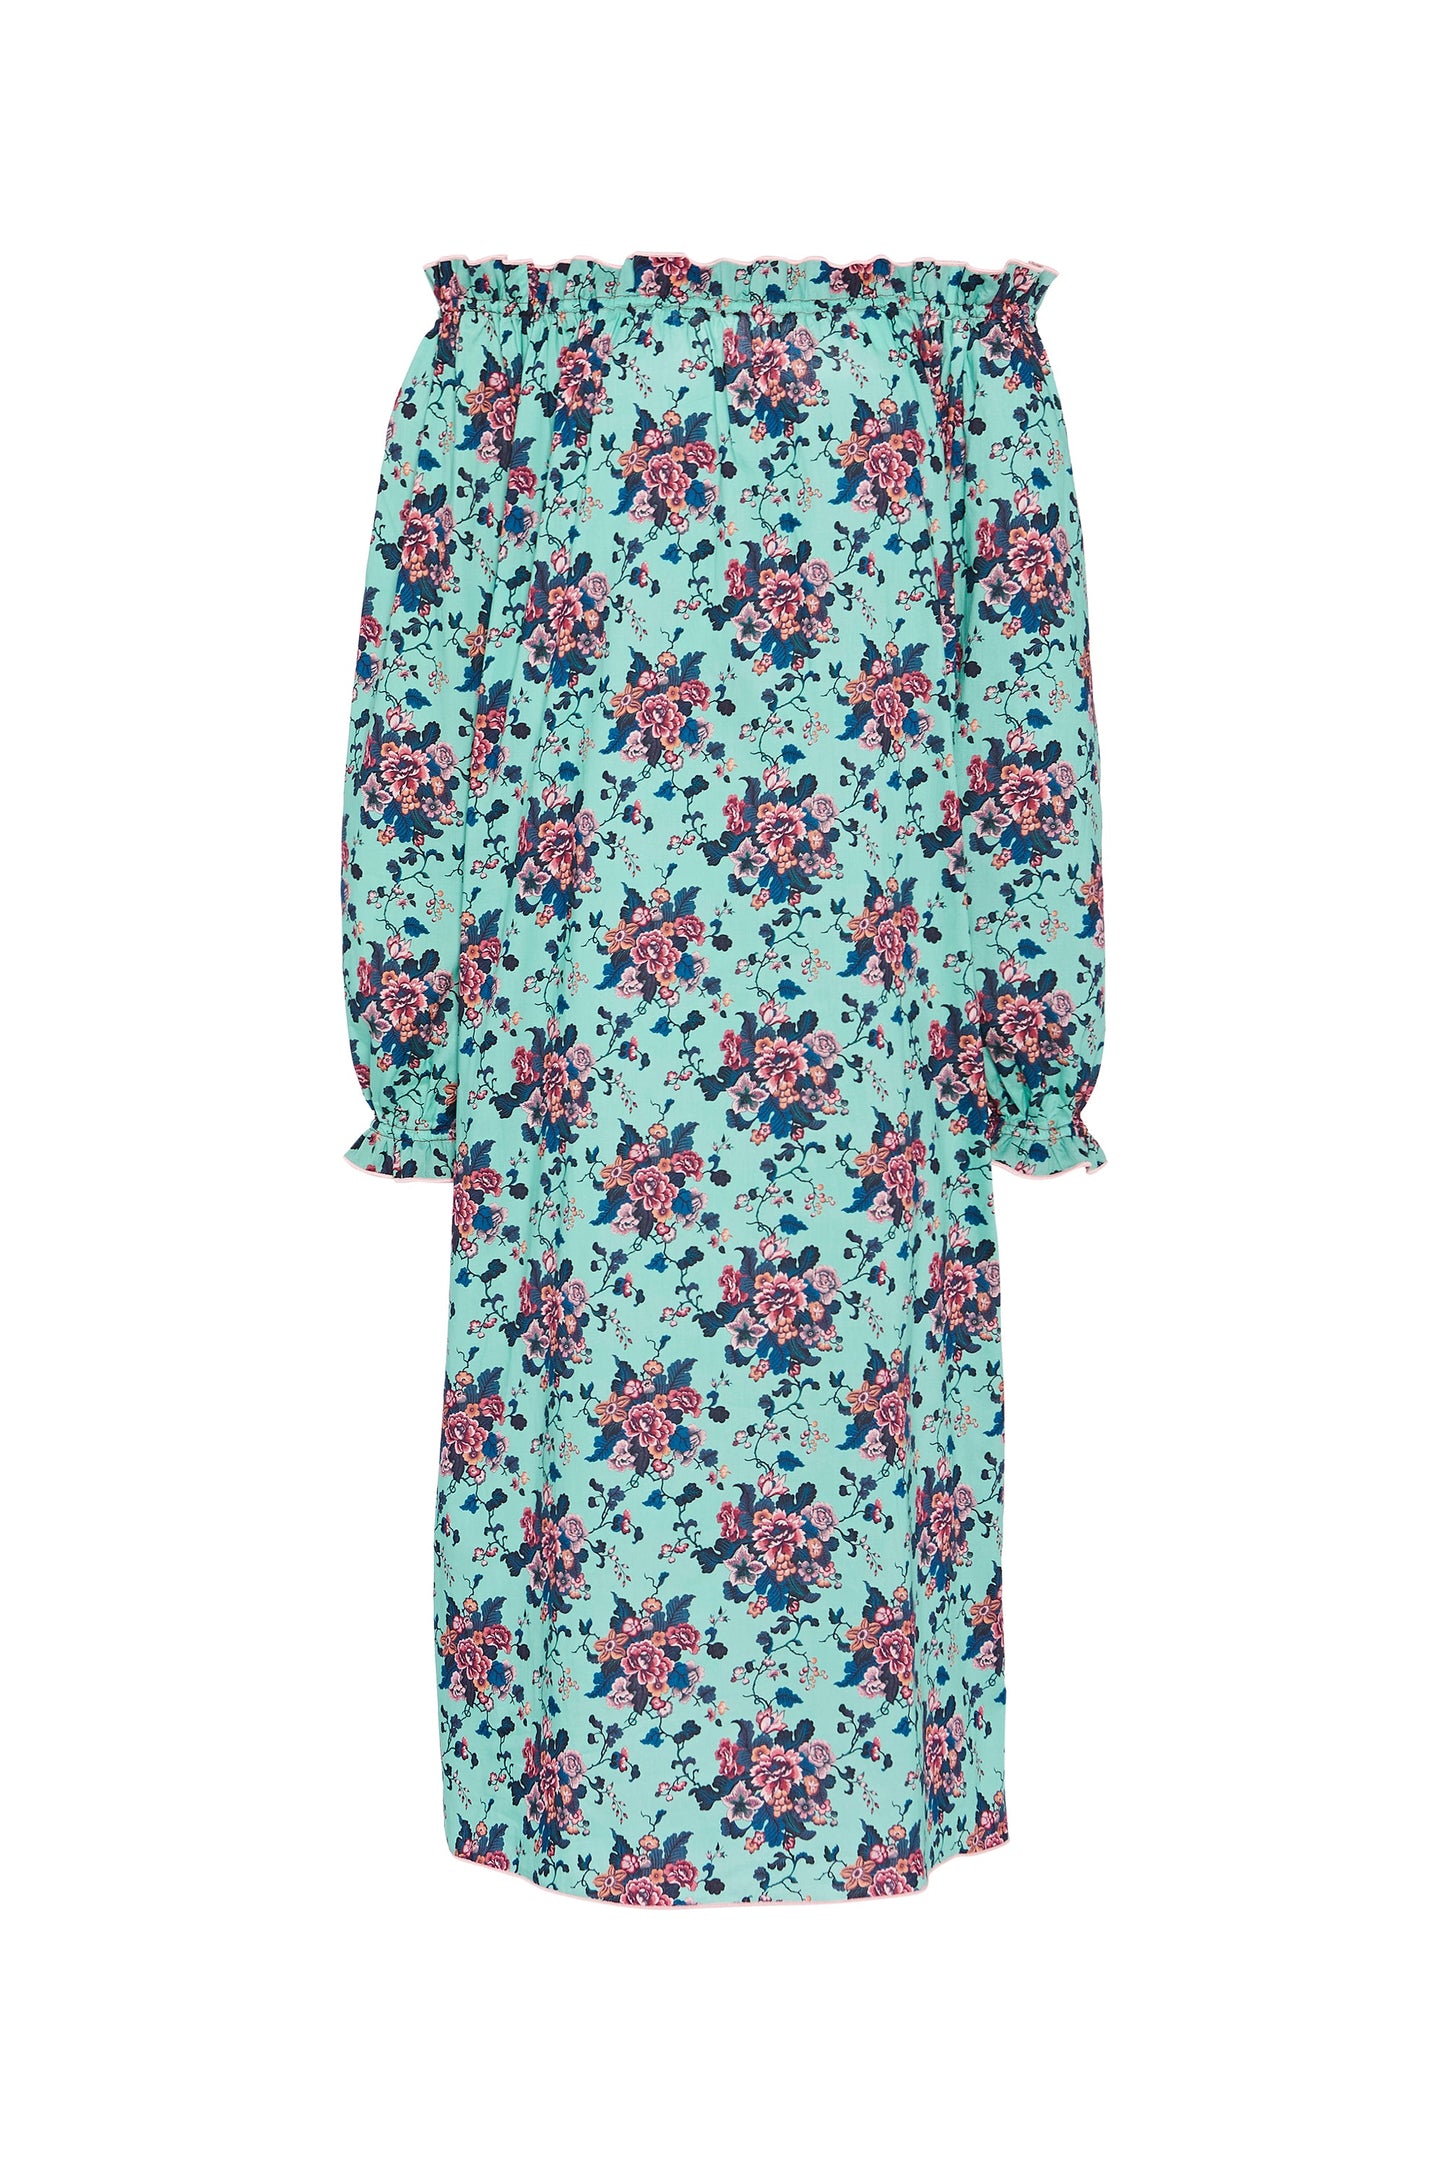 Grace Dress in Turquoise Chinoiserie